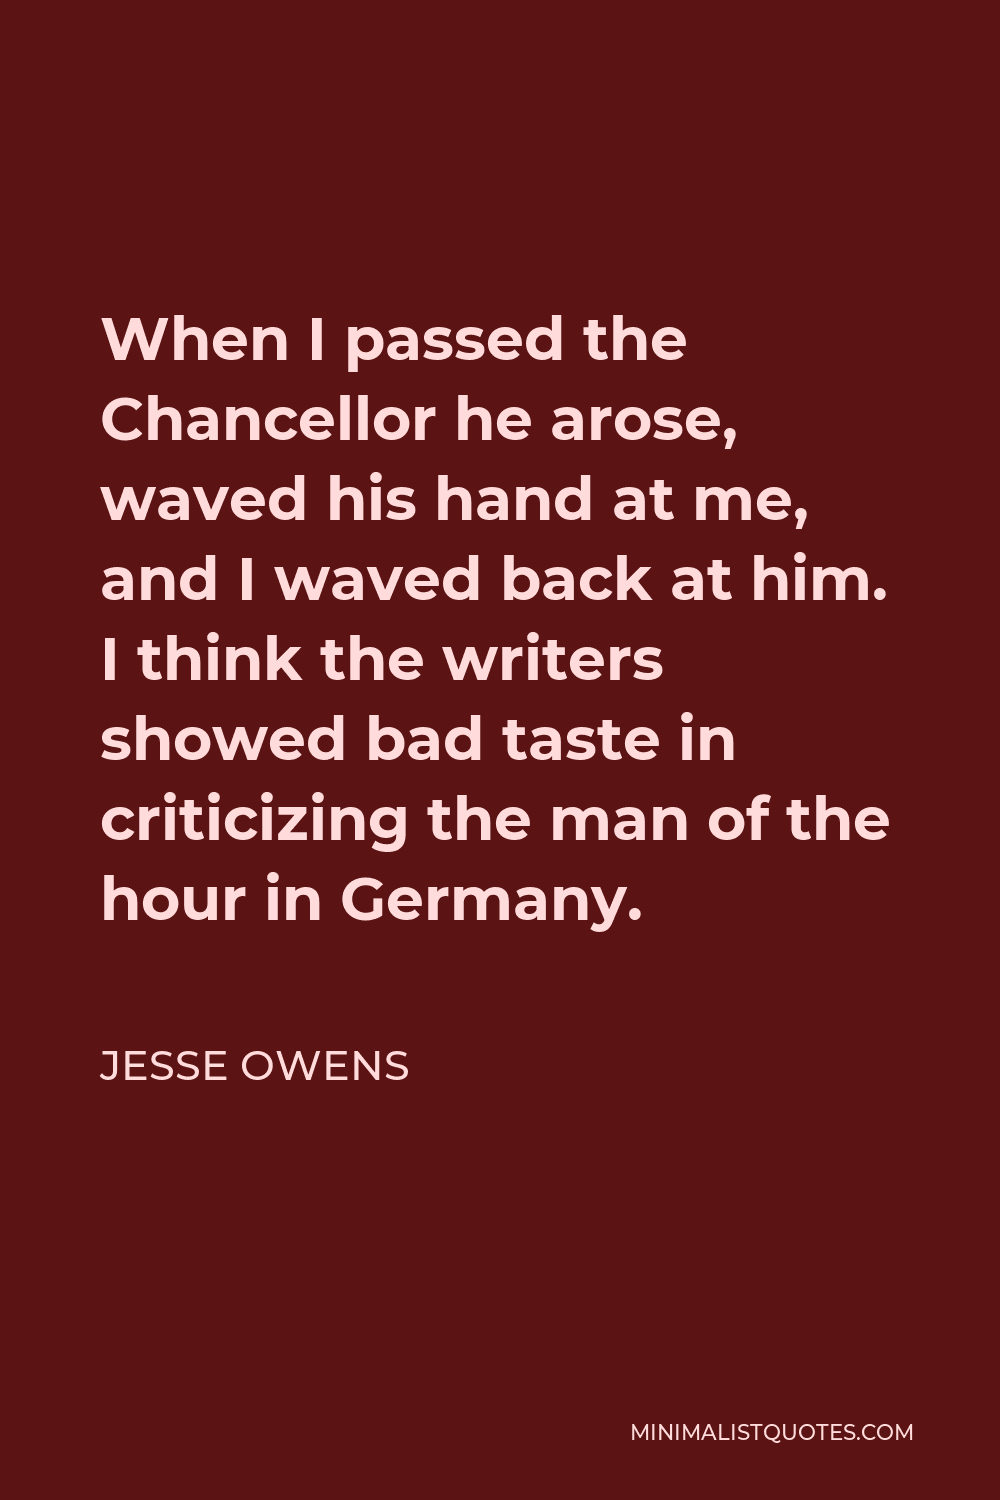 Jesse Owens Quote - When I passed the Chancellor he arose, waved his hand at me, and I waved back at him. I think the writers showed bad taste in criticizing the man of the hour in Germany.